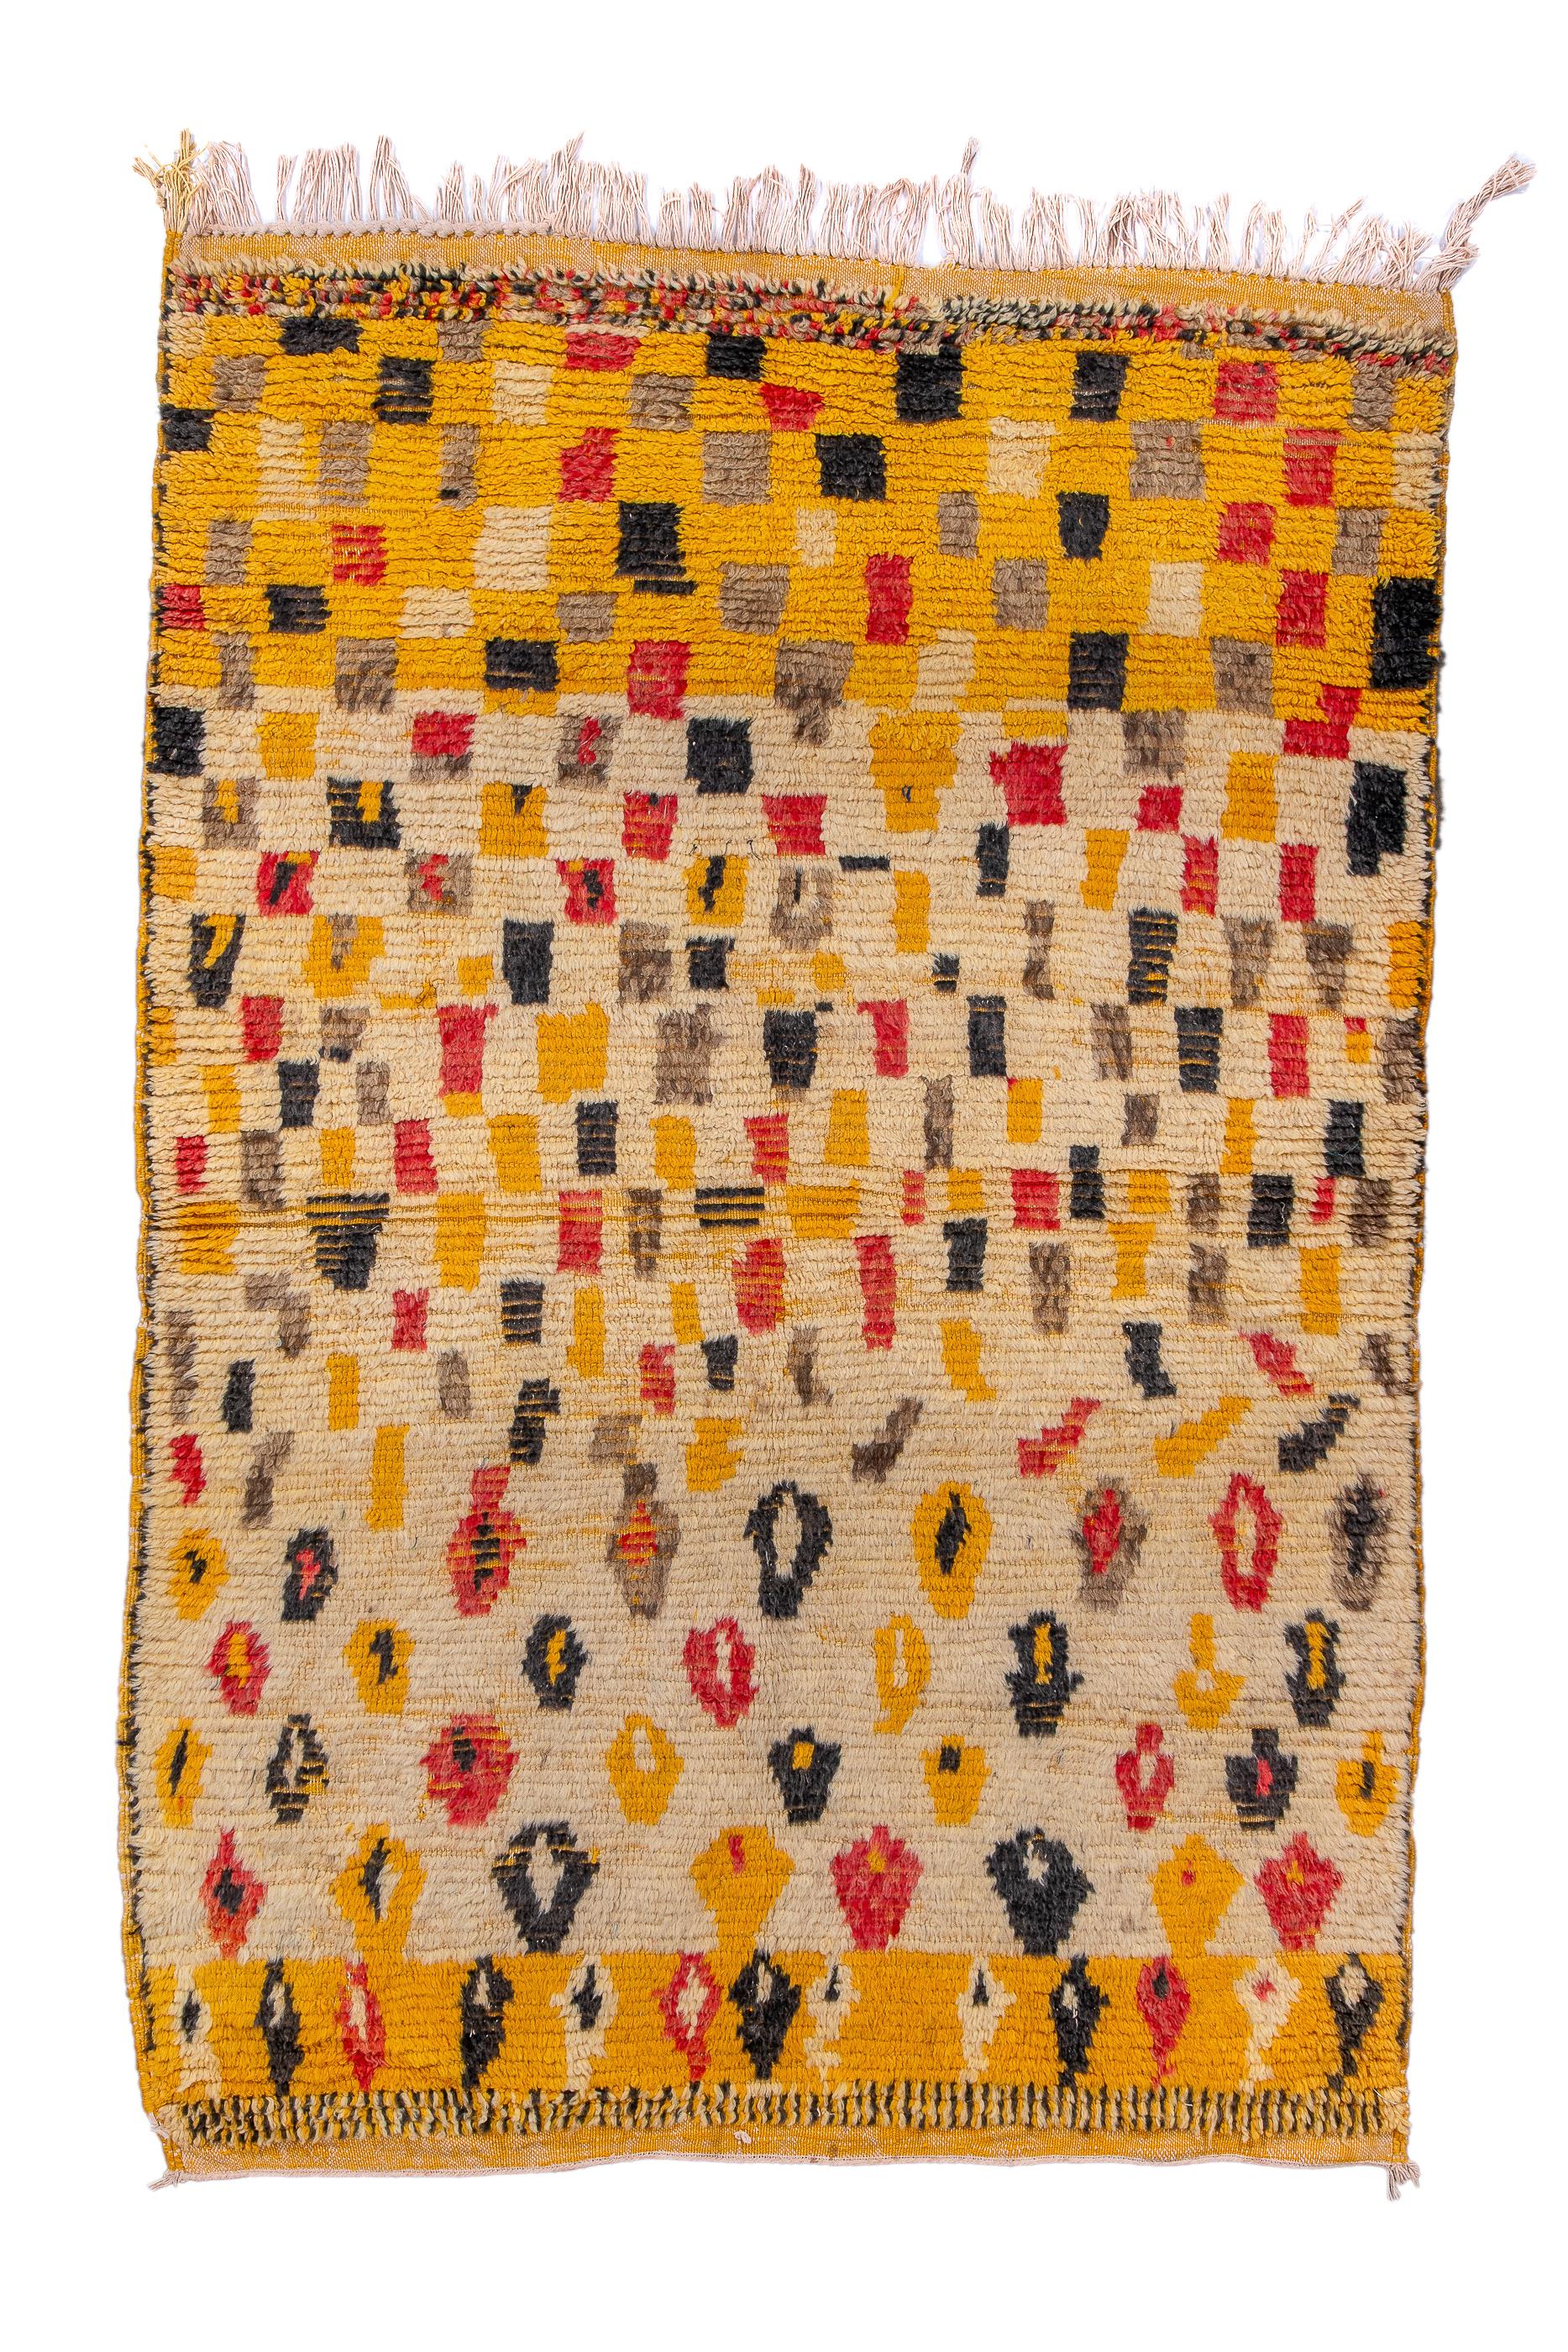 This coarsely woven rustic Moroccan rug stars with a yellow field, switches to ecru and then goes back to yellow at the top, all the while displaying wonky cypresses, irregular colour patches and finally a relatively ordered multi-chromatic